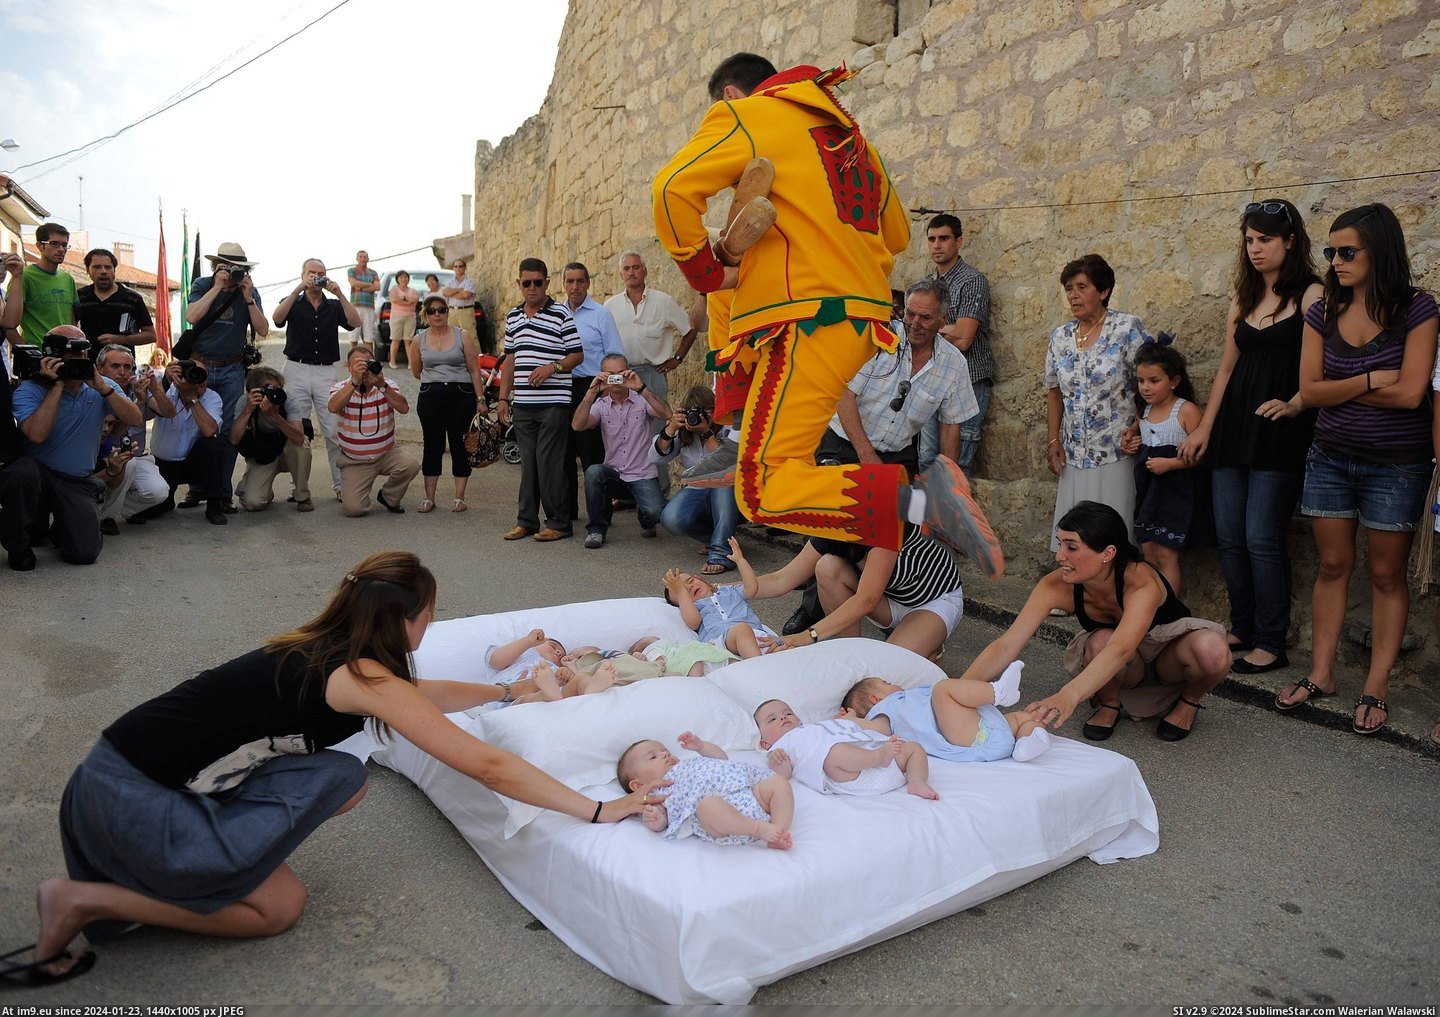 #Wtf #Baby #Festival #Jumping #Spain [Wtf] Baby Jumping Festival in Spain Pic. (Obraz z album My r/WTF favs))